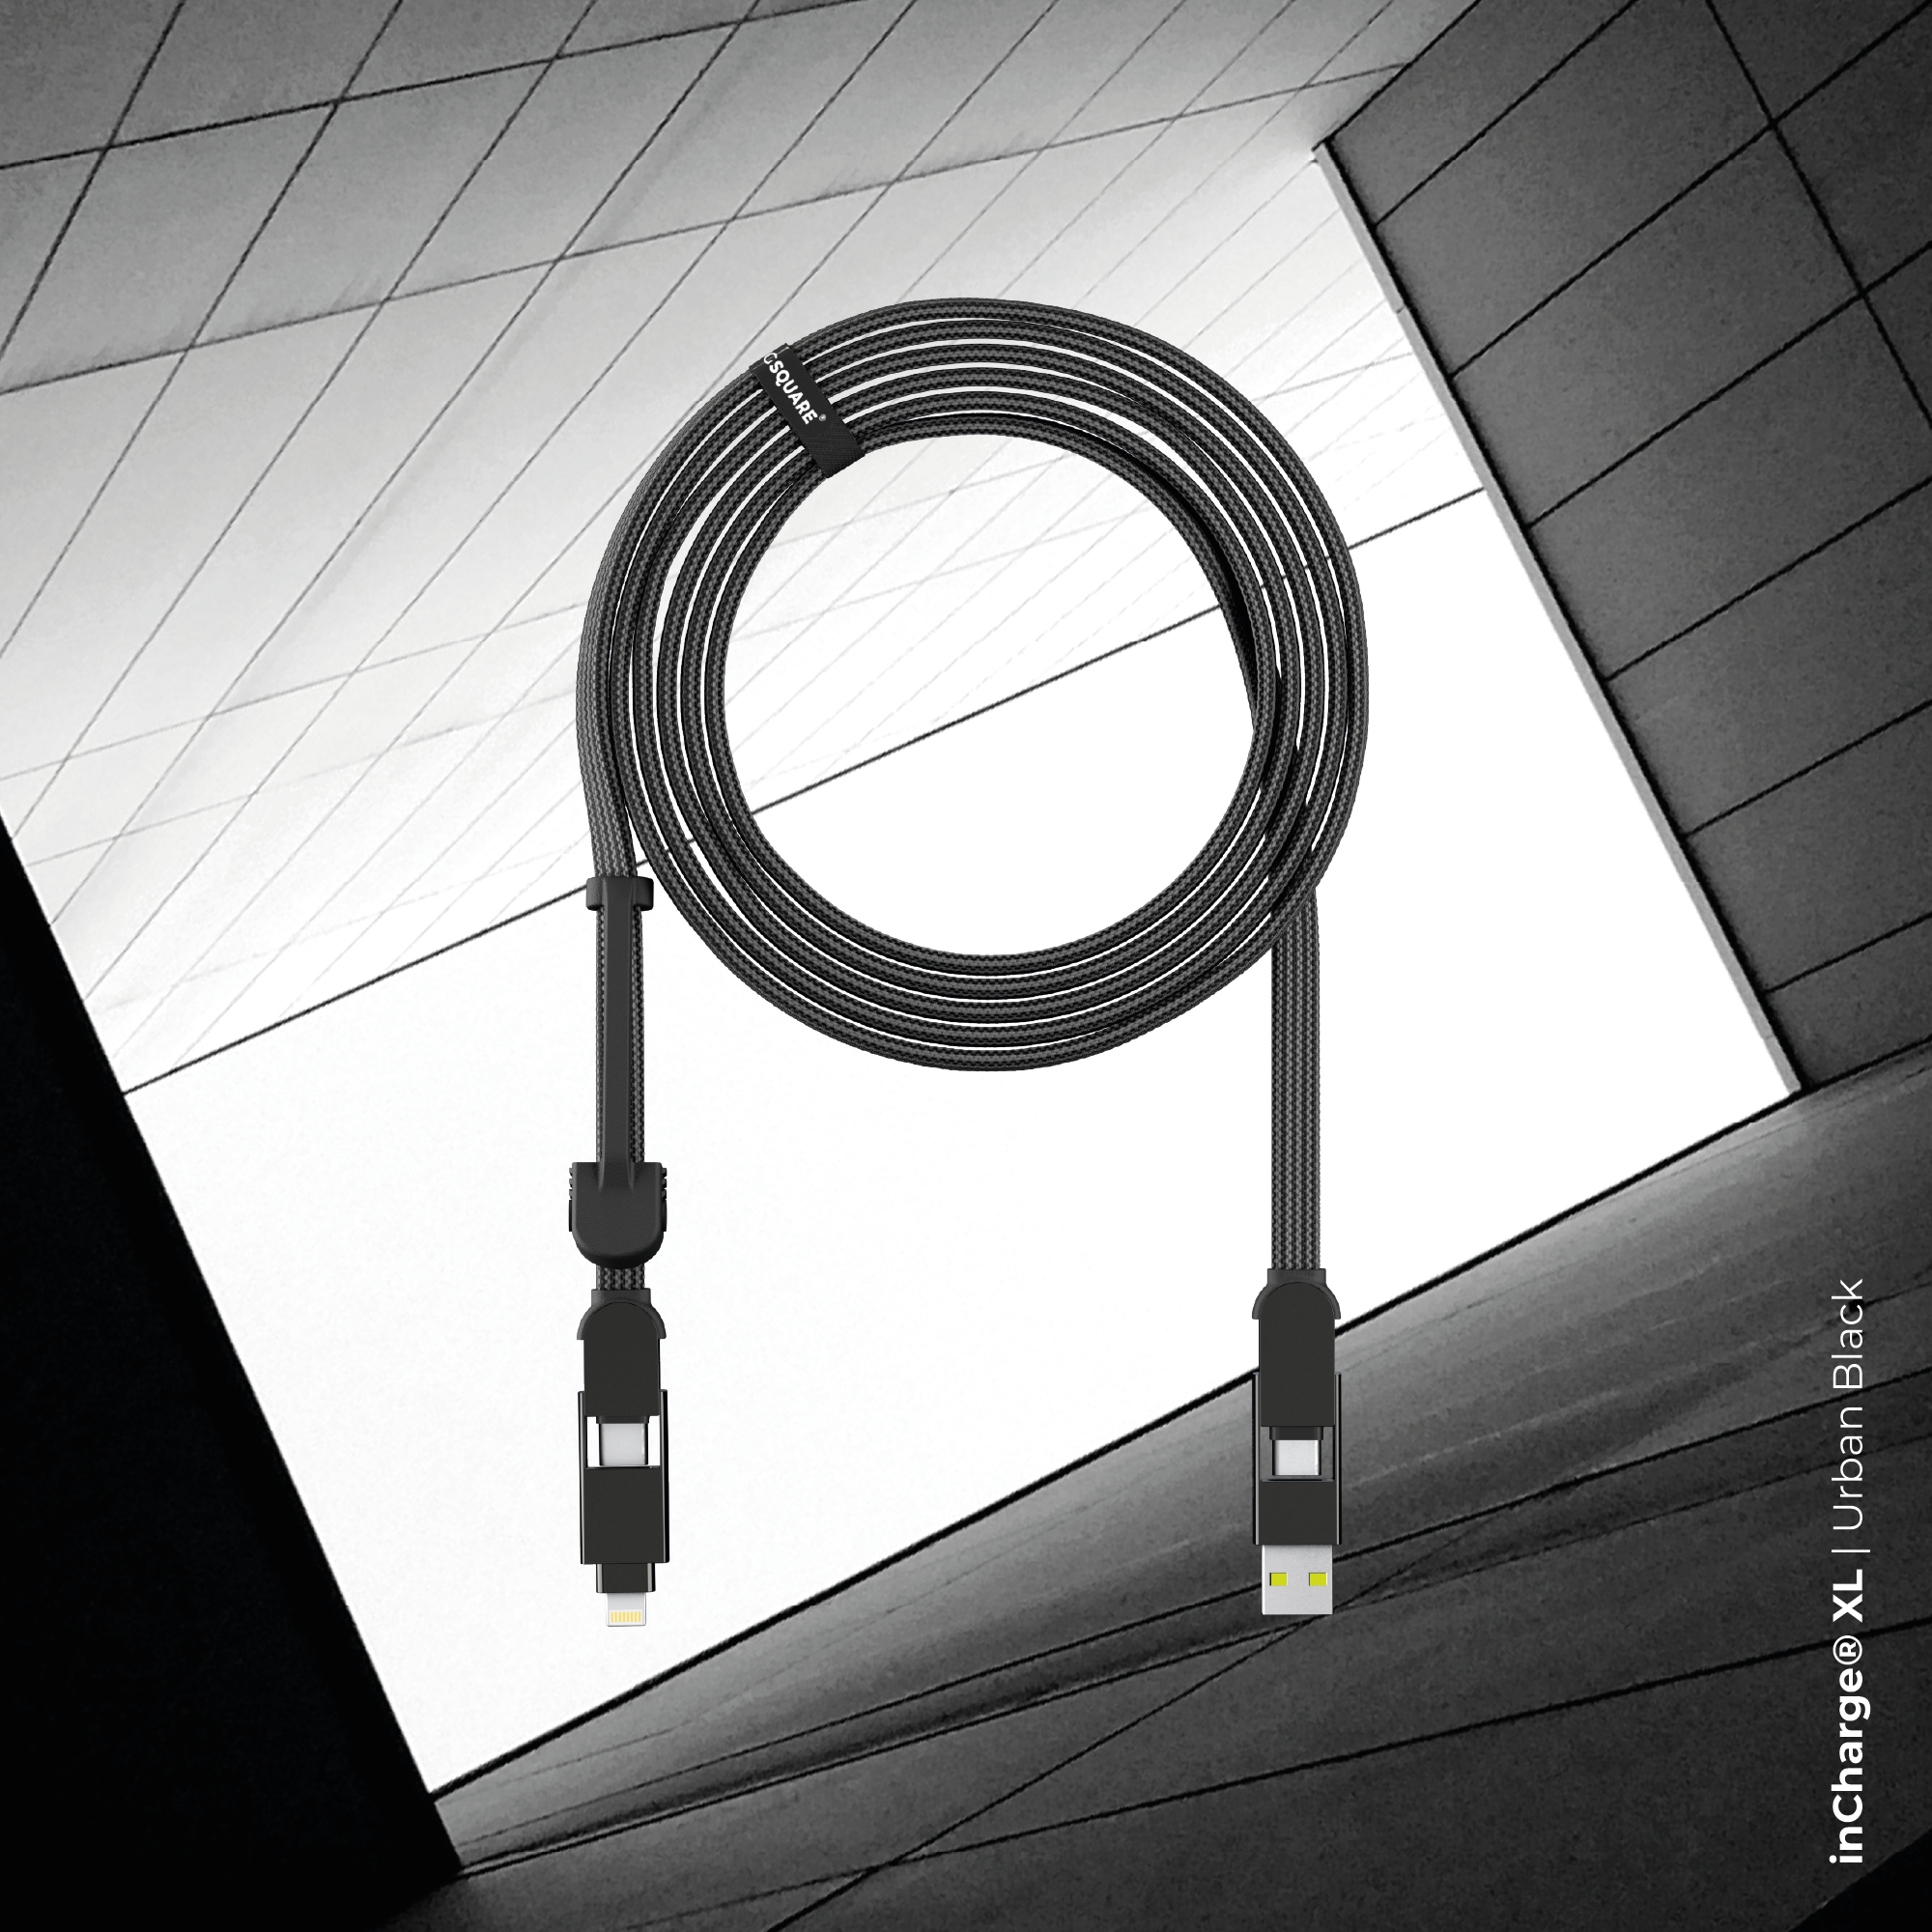 inCharge XL, Making All Other Cables Obsolete - Storming Gravity